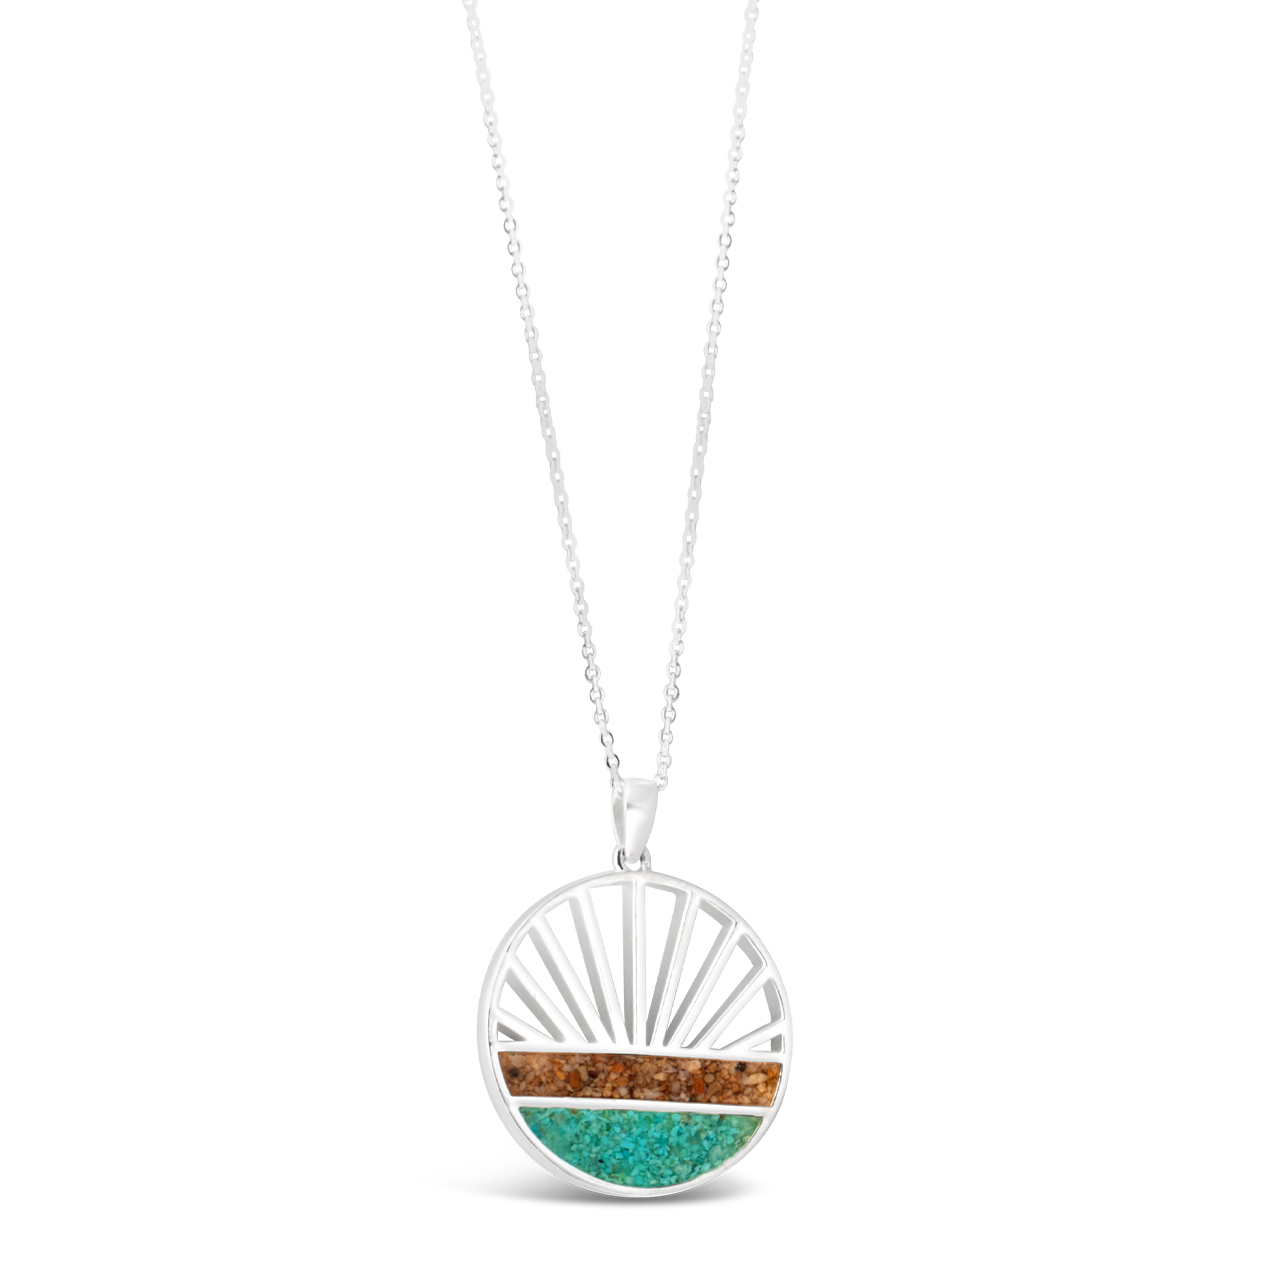 This sterling silver necklace features a shoreline and two sand or earth elements. The perfect Valentine's gift.